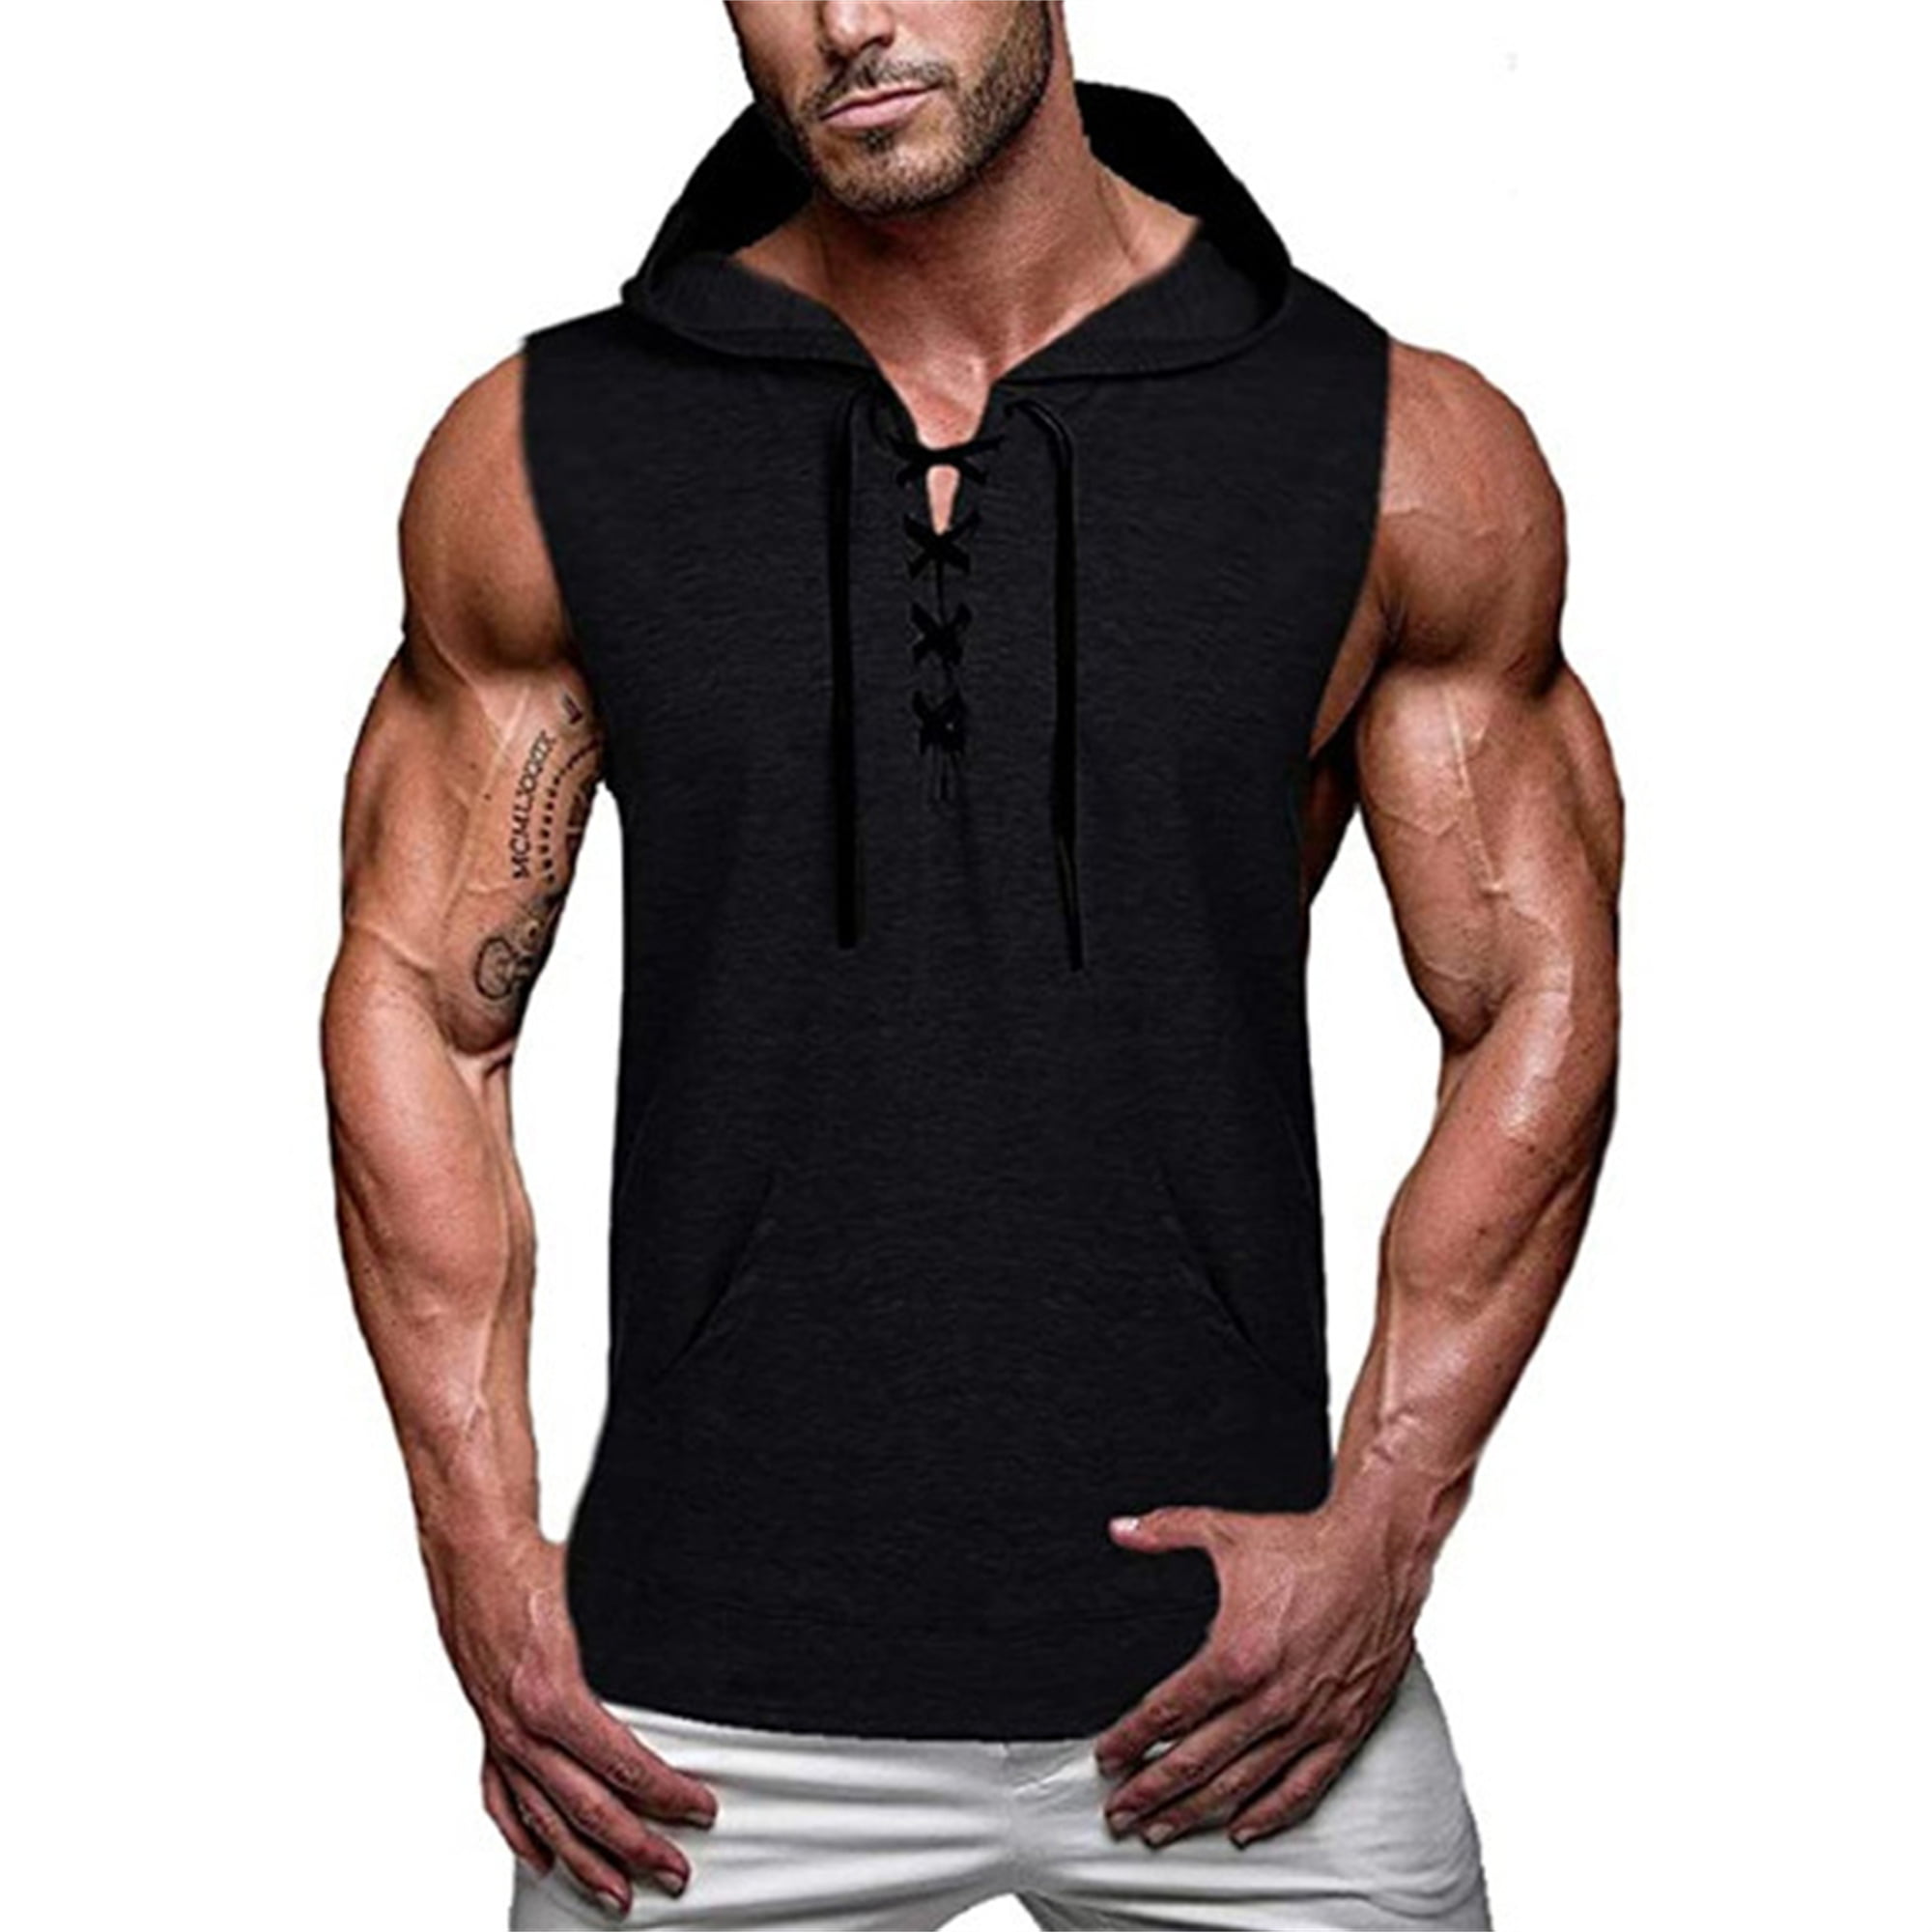 MENS HOODED SLEEVELESS TANK SIZE S XXL MUSCLE BODYBUILDING GYM ARMY GYM 